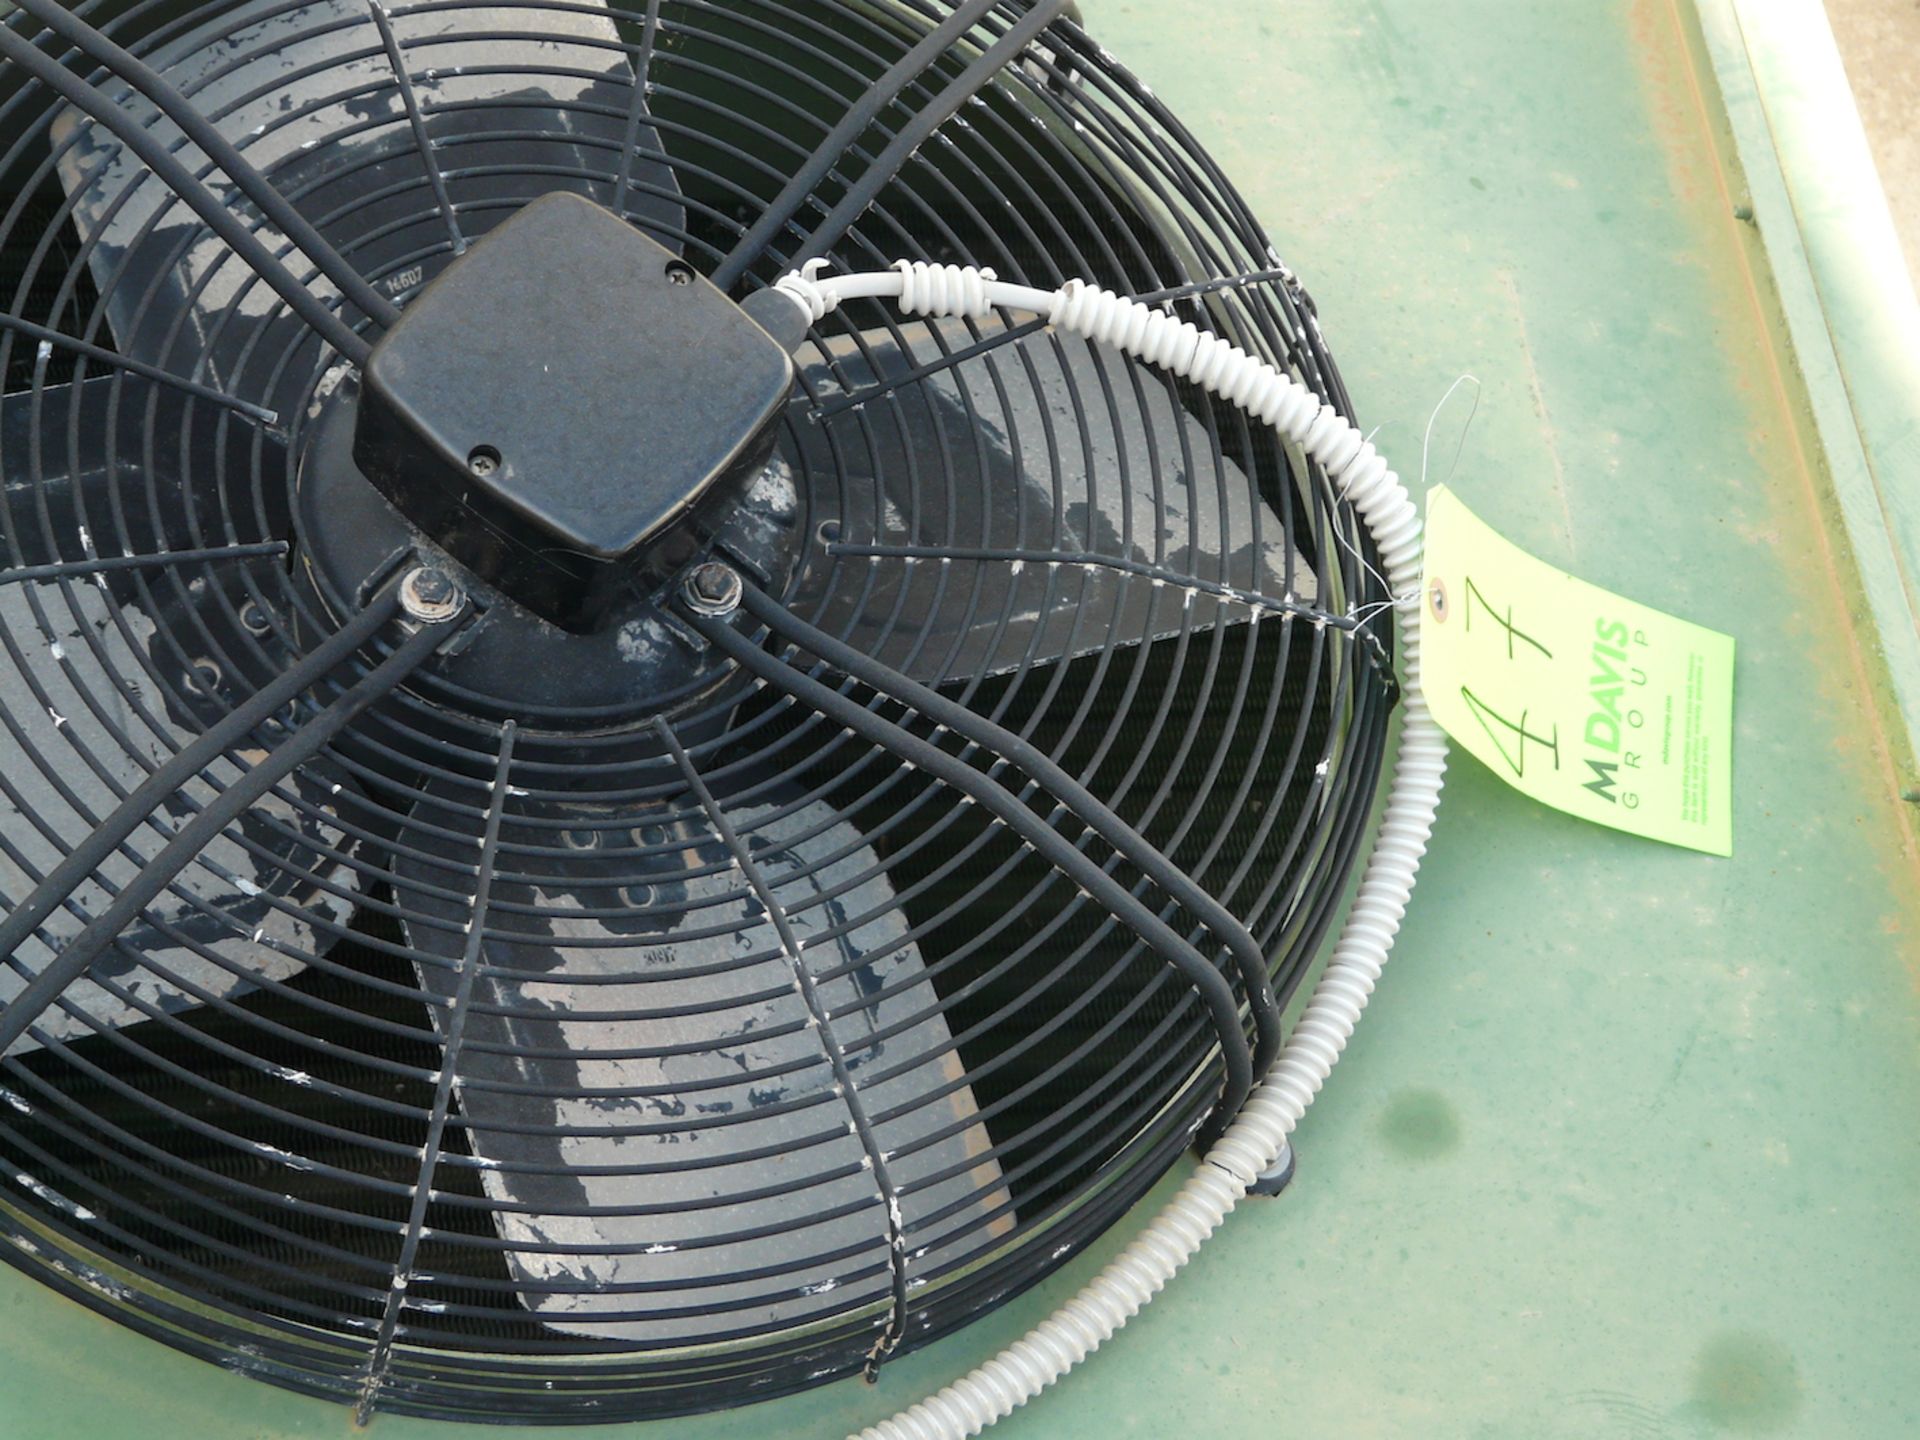 English: Condenser with 4 fans (one is out of order) 180m³ Used for Cold Rooms Greek: Κοντέσερ - Bild 9 aus 9